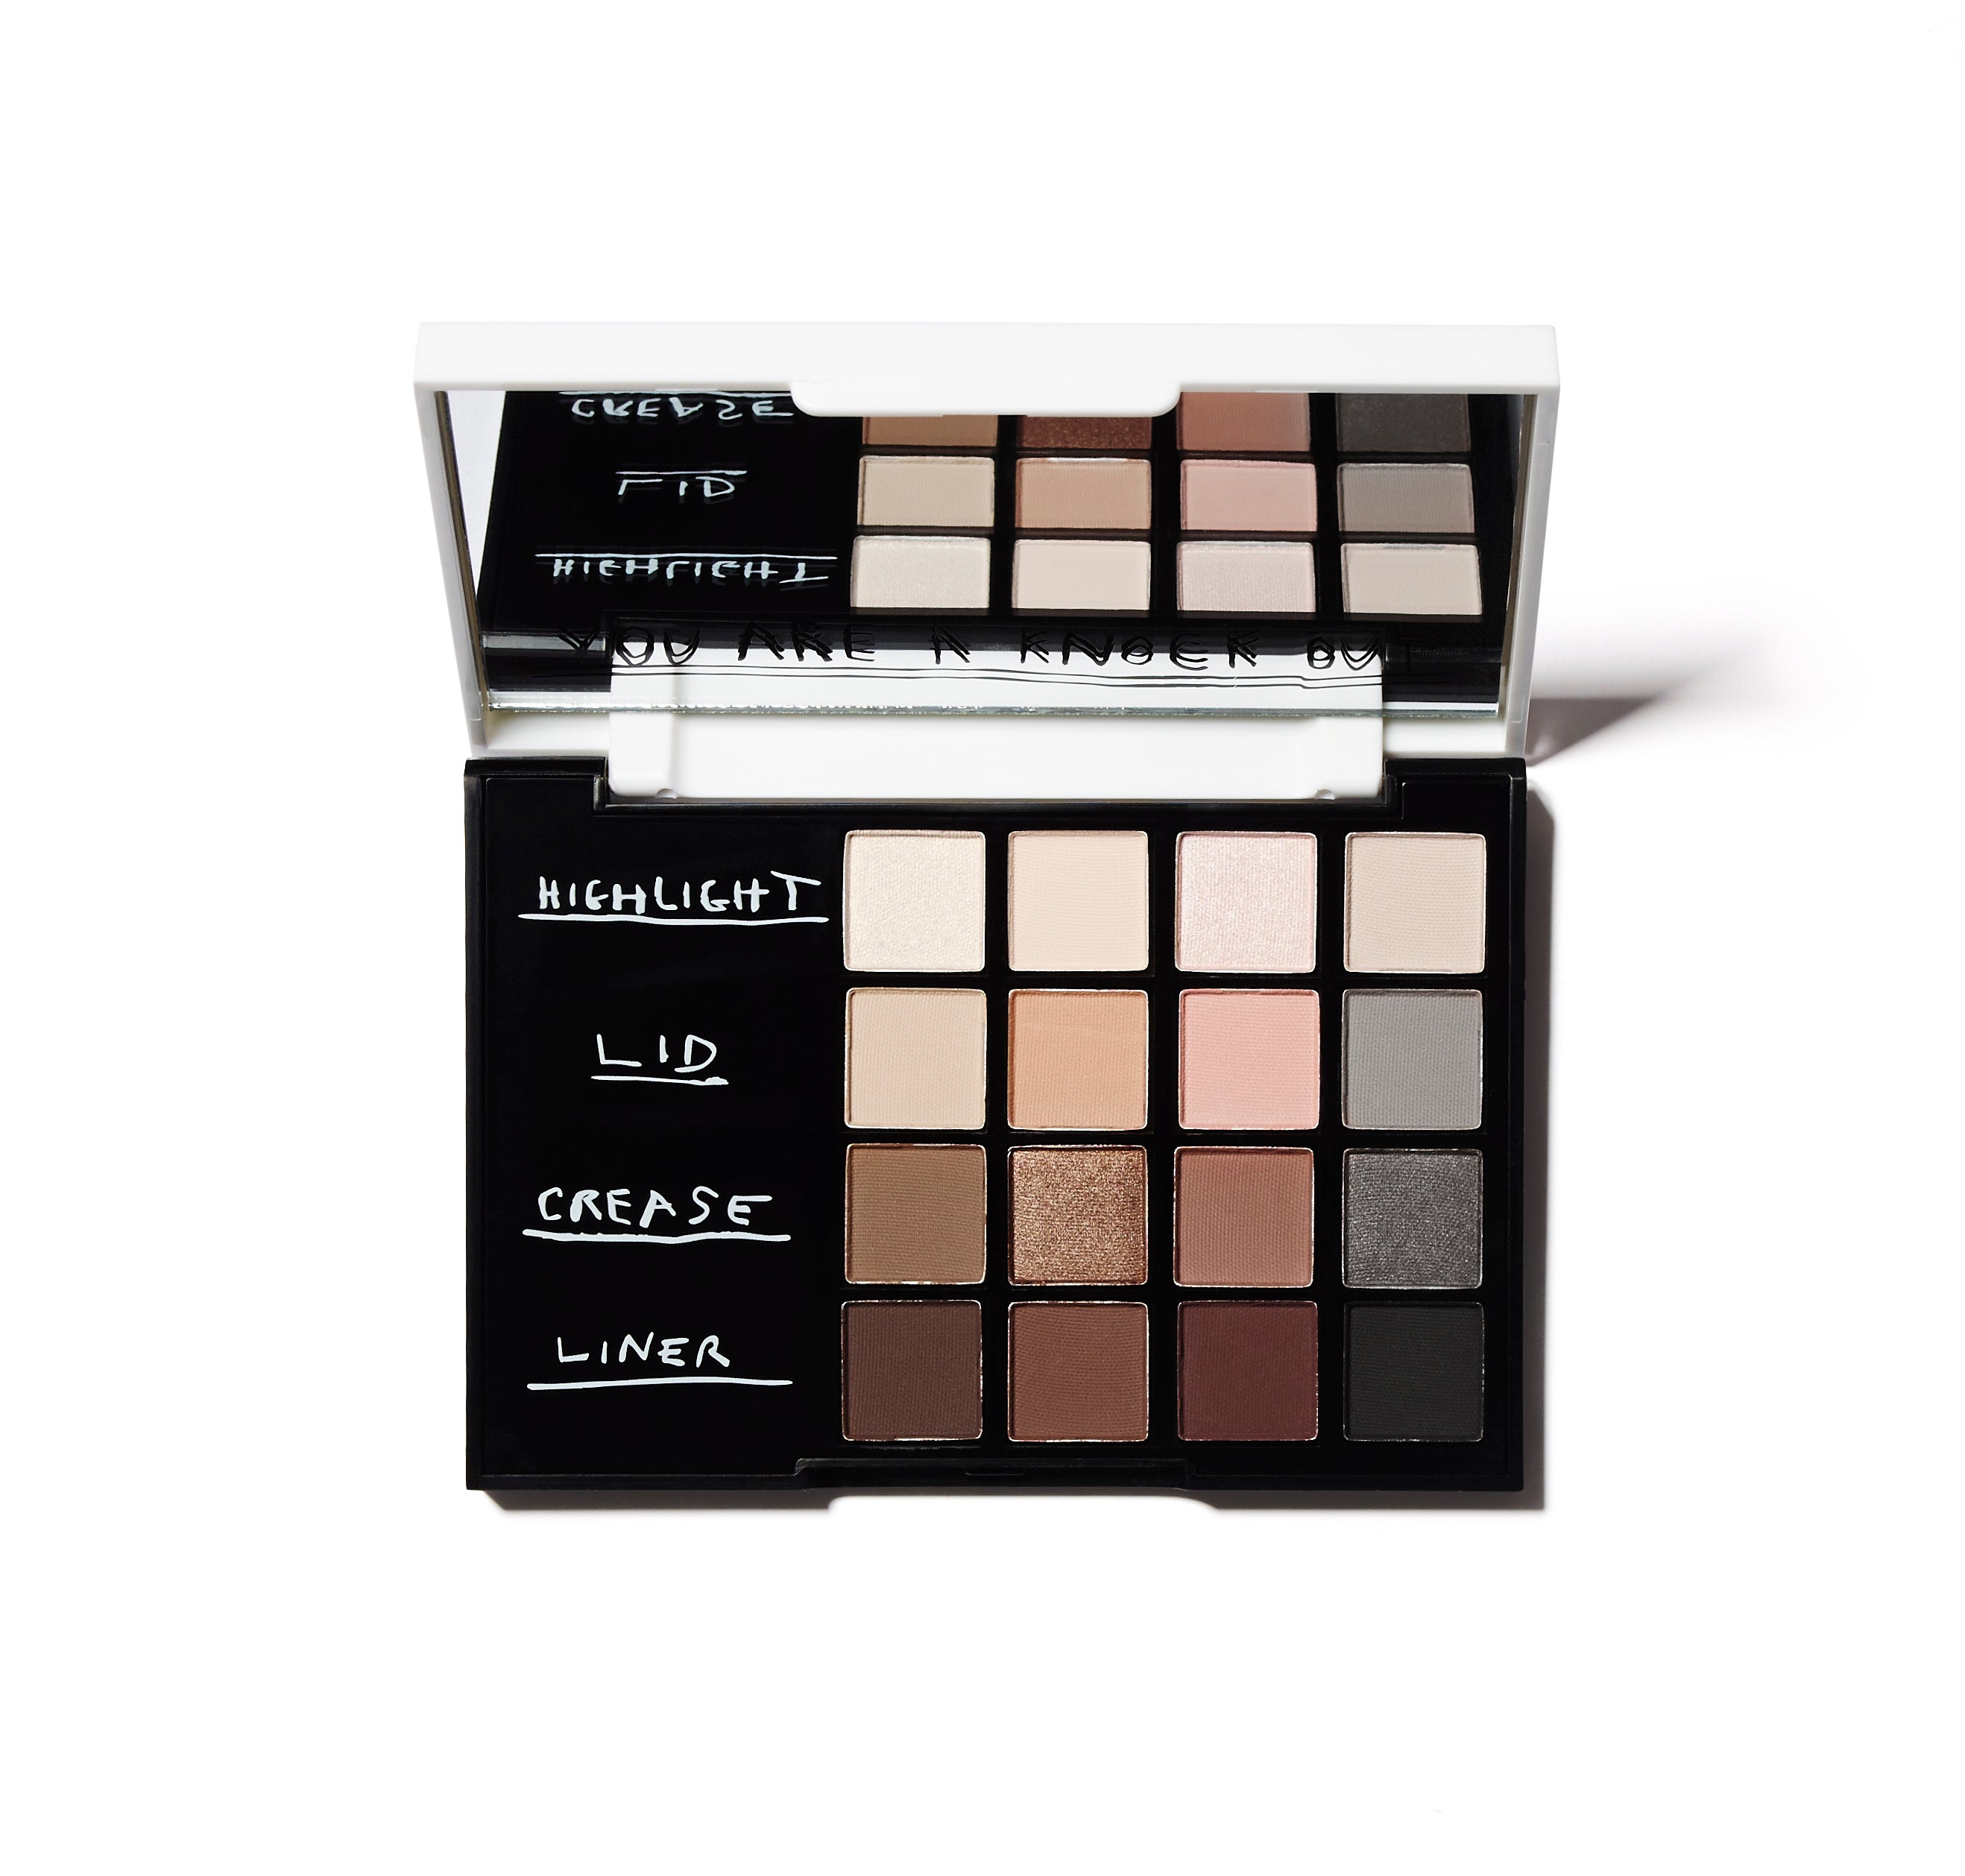 13 Must-Have Makeup Palettes For Spring